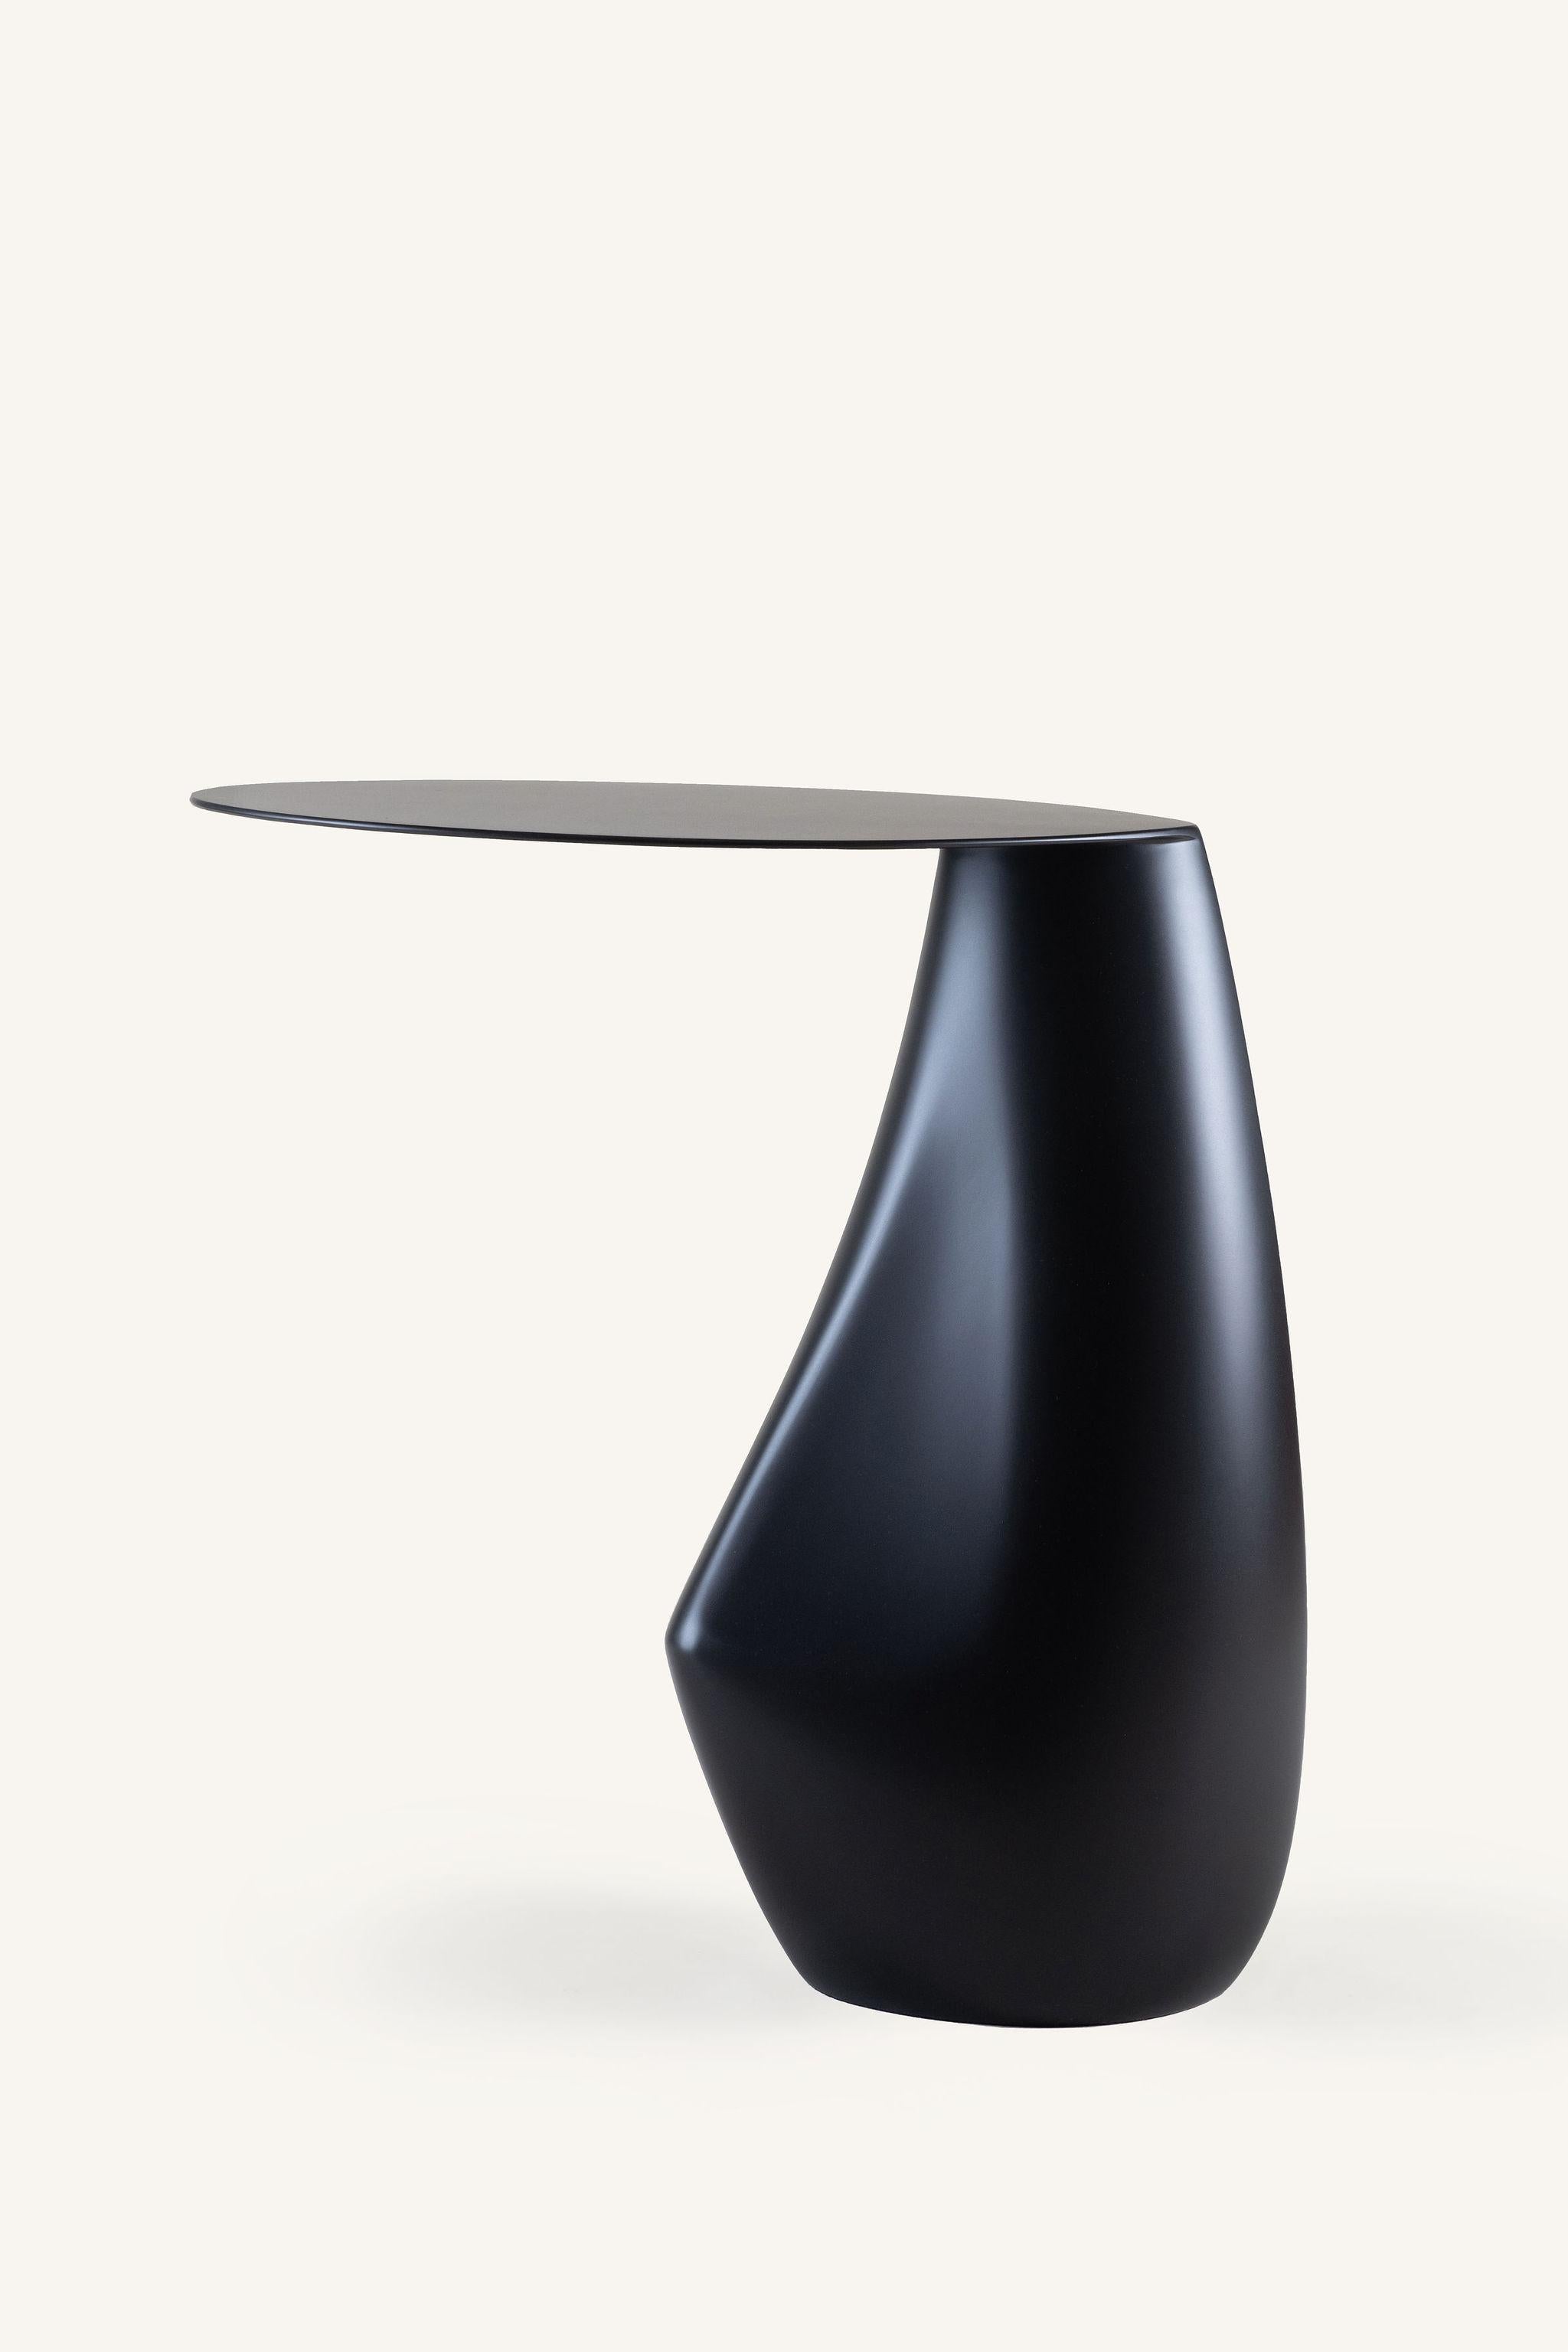 A signature piece from our stone collection, the expertly hand-sculpted dionis side table evokes the subtle curves and contours of tumbled stones shaped by the ocean. This side table presents as sculpture yet functions as a table. 

Also available